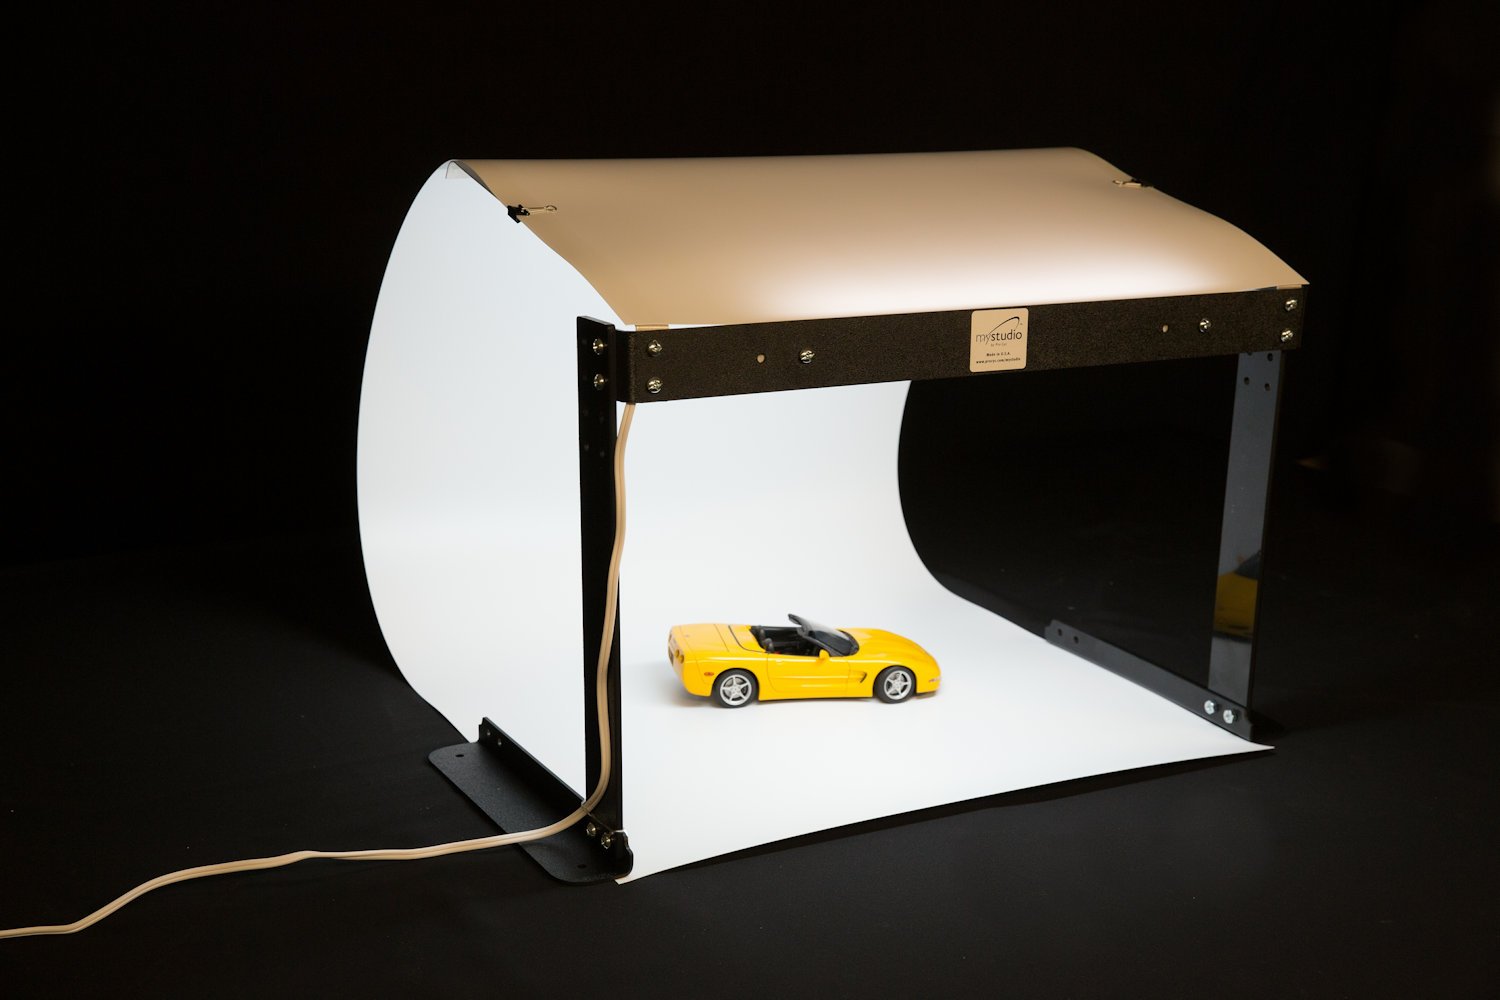 MyStudio PS5 Portable Table Top Photo Studio Lightbox Bonus Kit with 5 Colored Backgrounds and Two 9 x 12 White Bounce Card Reflectors 